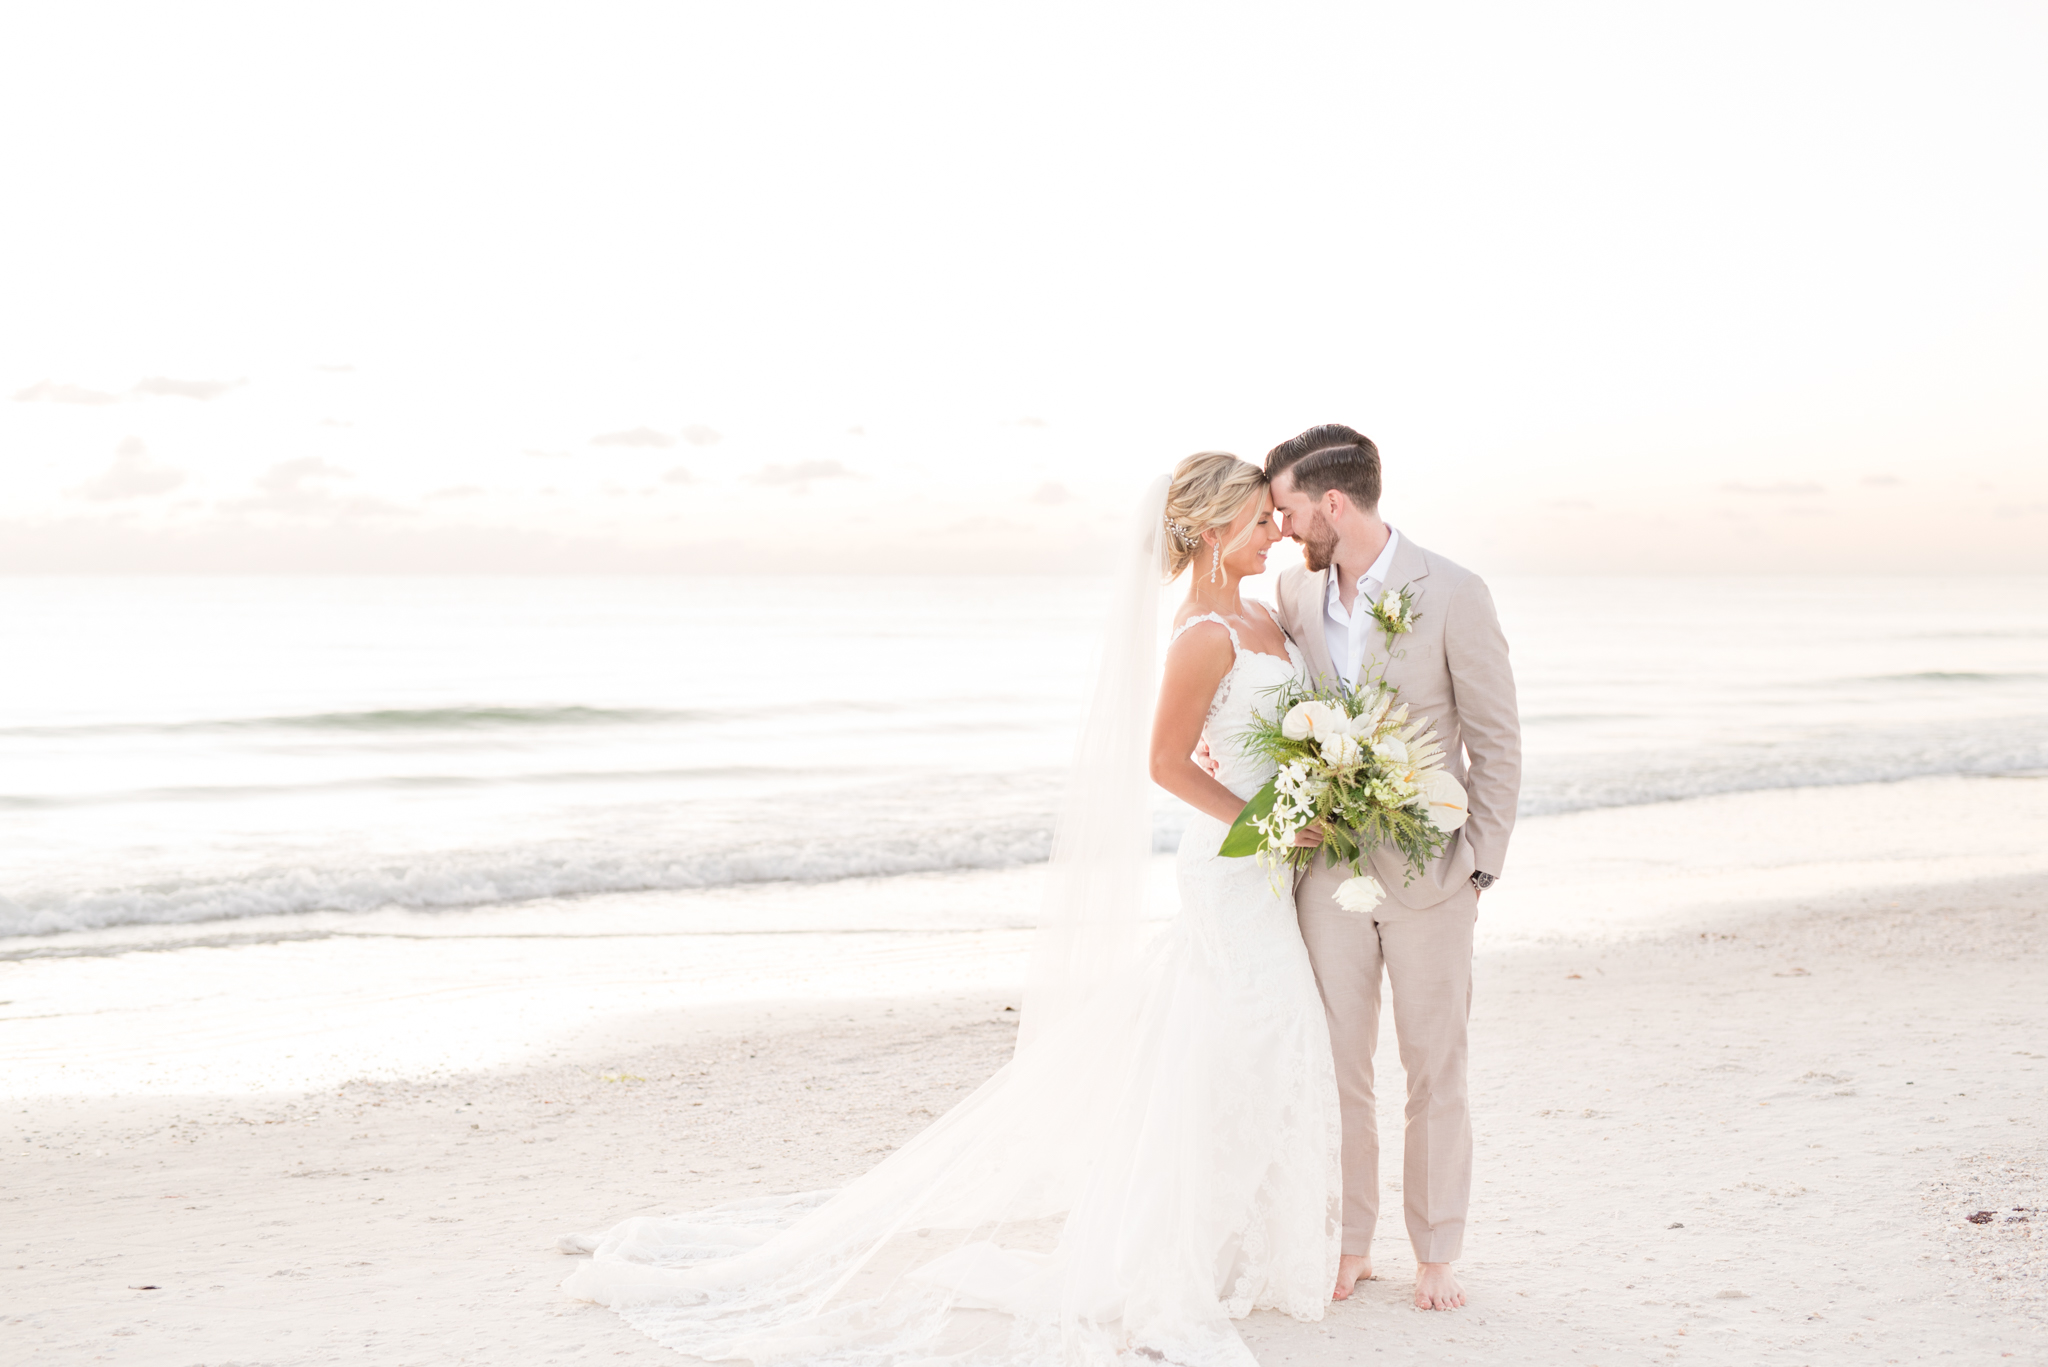 Bride and groom embrace on the beach.